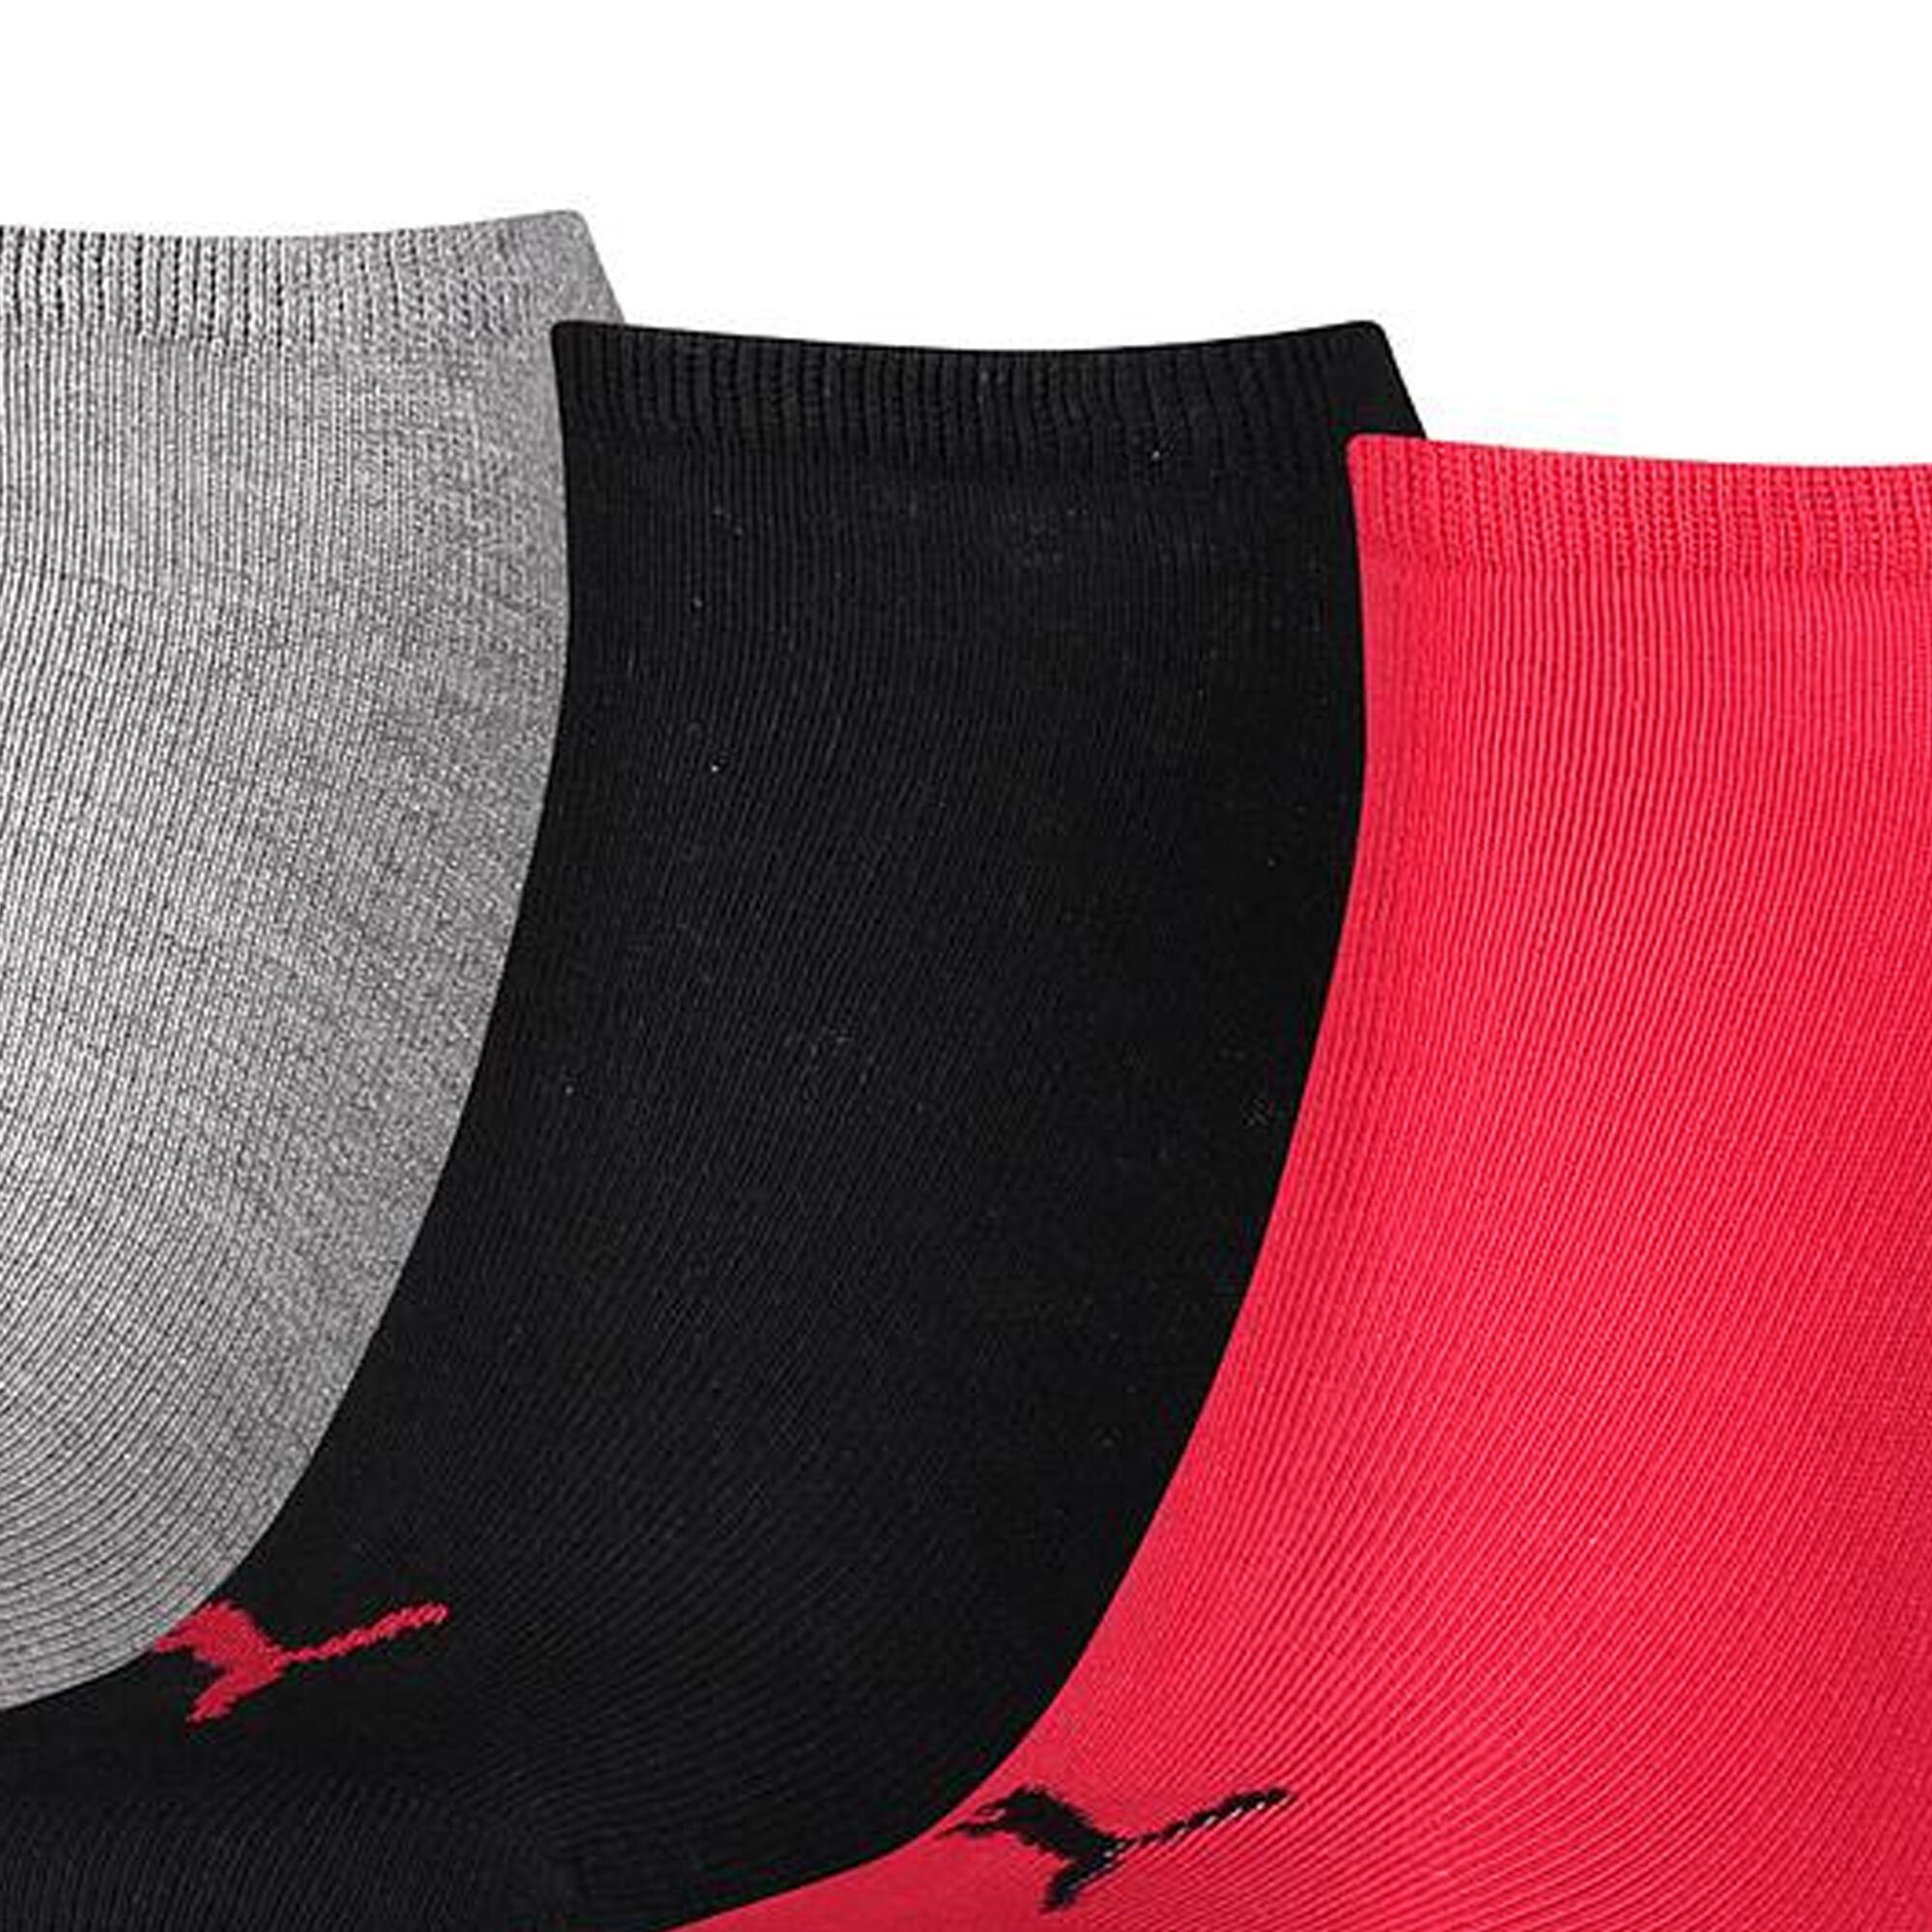 Unisex Adult Invisible Socks (Pack of 3) (Black/Red/Grey) 3/3